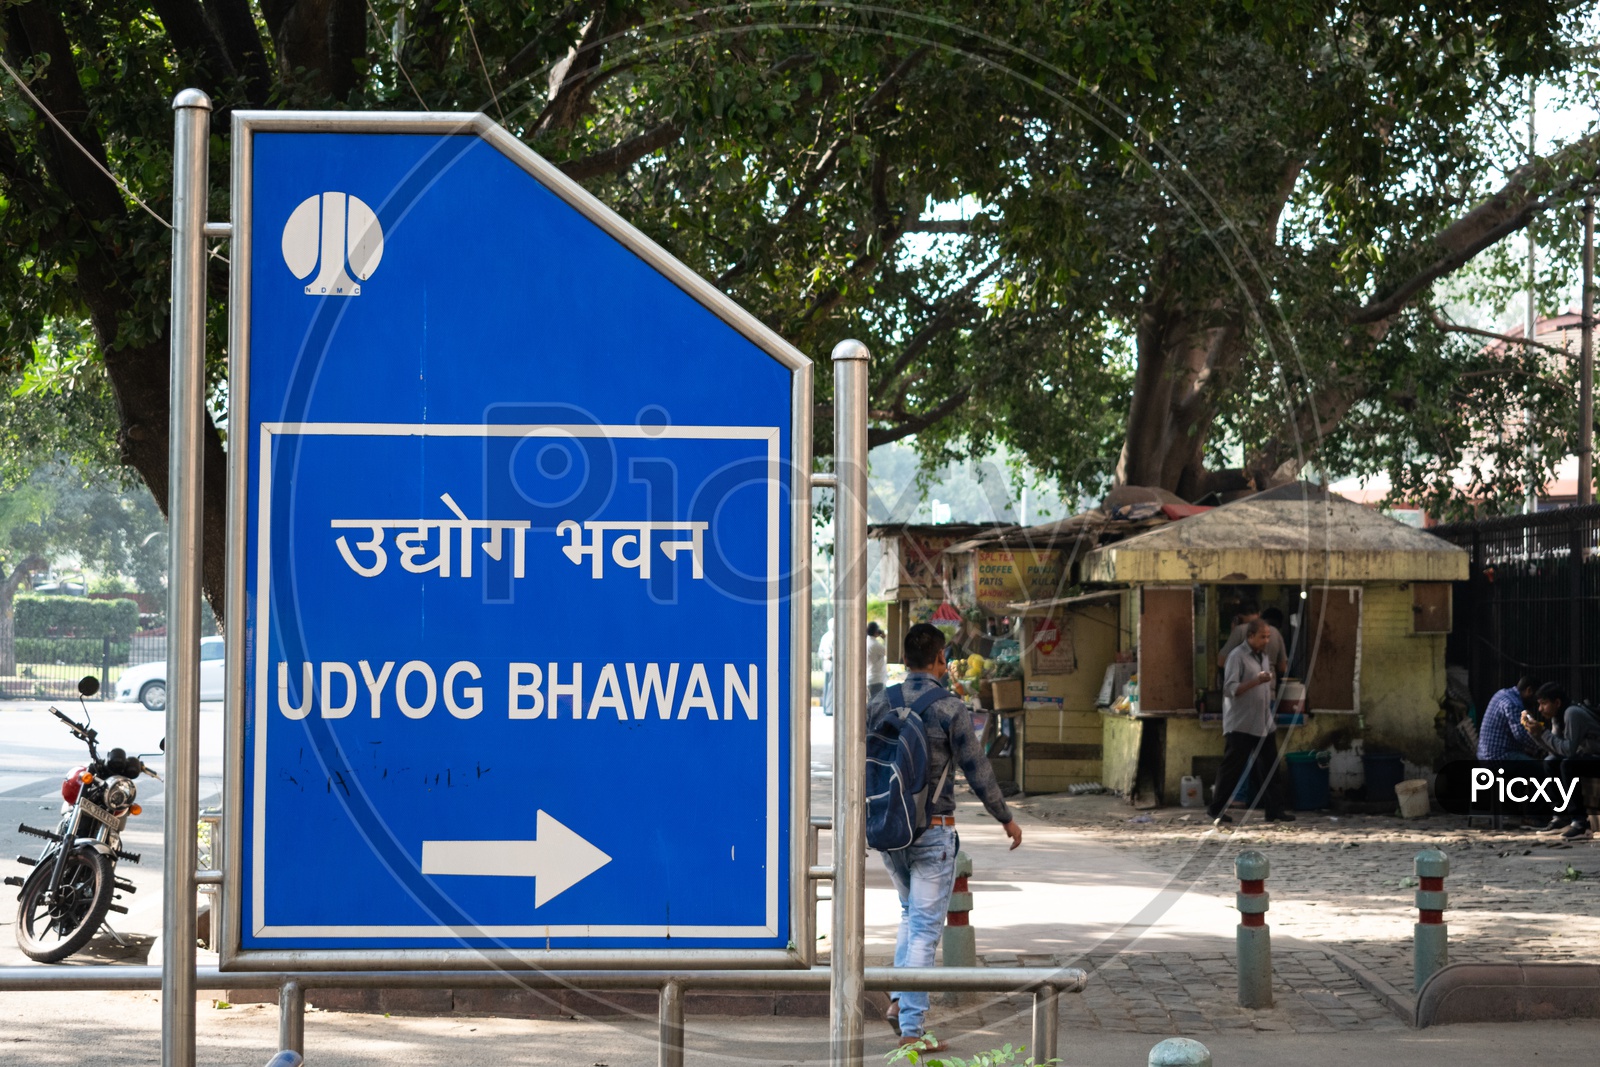 Udyog Bhawan  Name Board With Directions